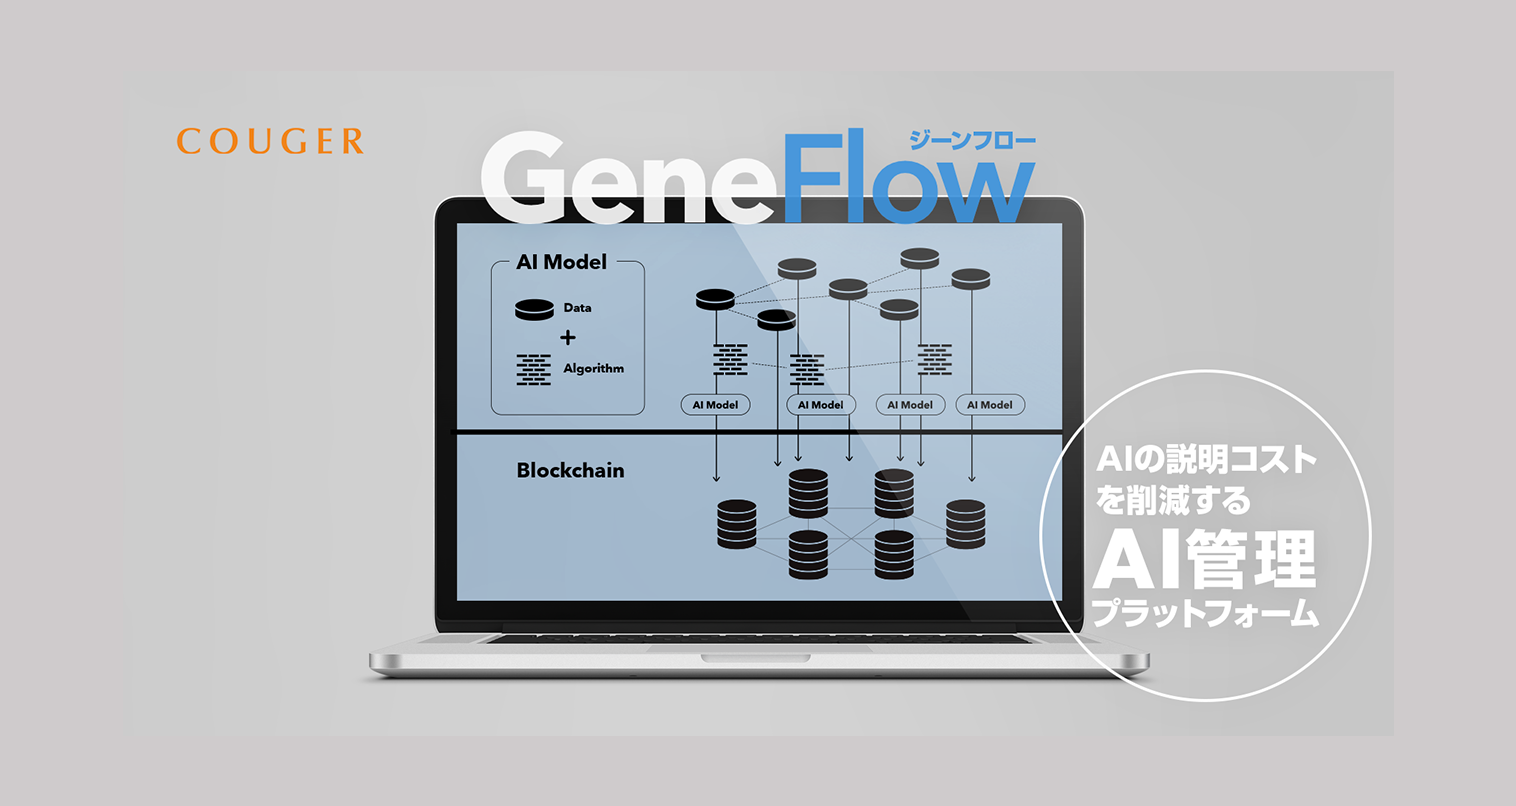 Launched "GeneFlow" beta version, a platform for managing AI learning history and behavior on the blockchain: Ensures transparency of AI learning history and supports project management